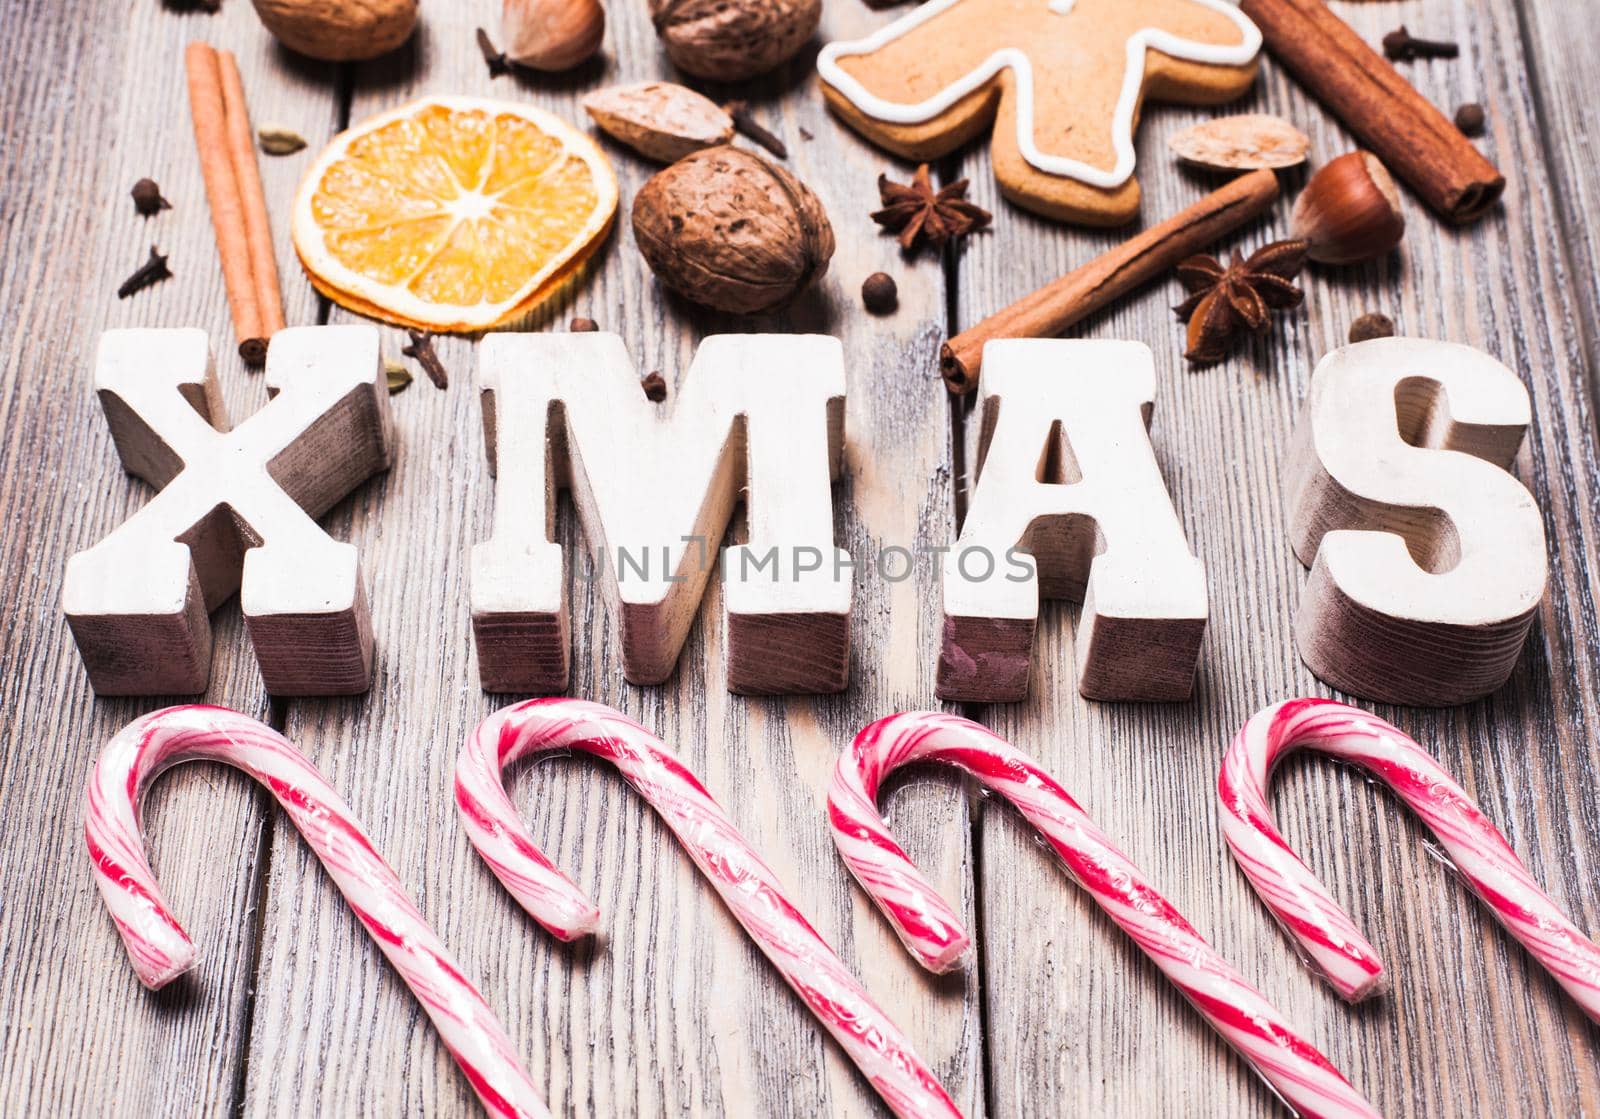 Gingerbreads with spices on the wooden table, wooden letters XMAS and Santa staffs candies. Christmas aroma decor